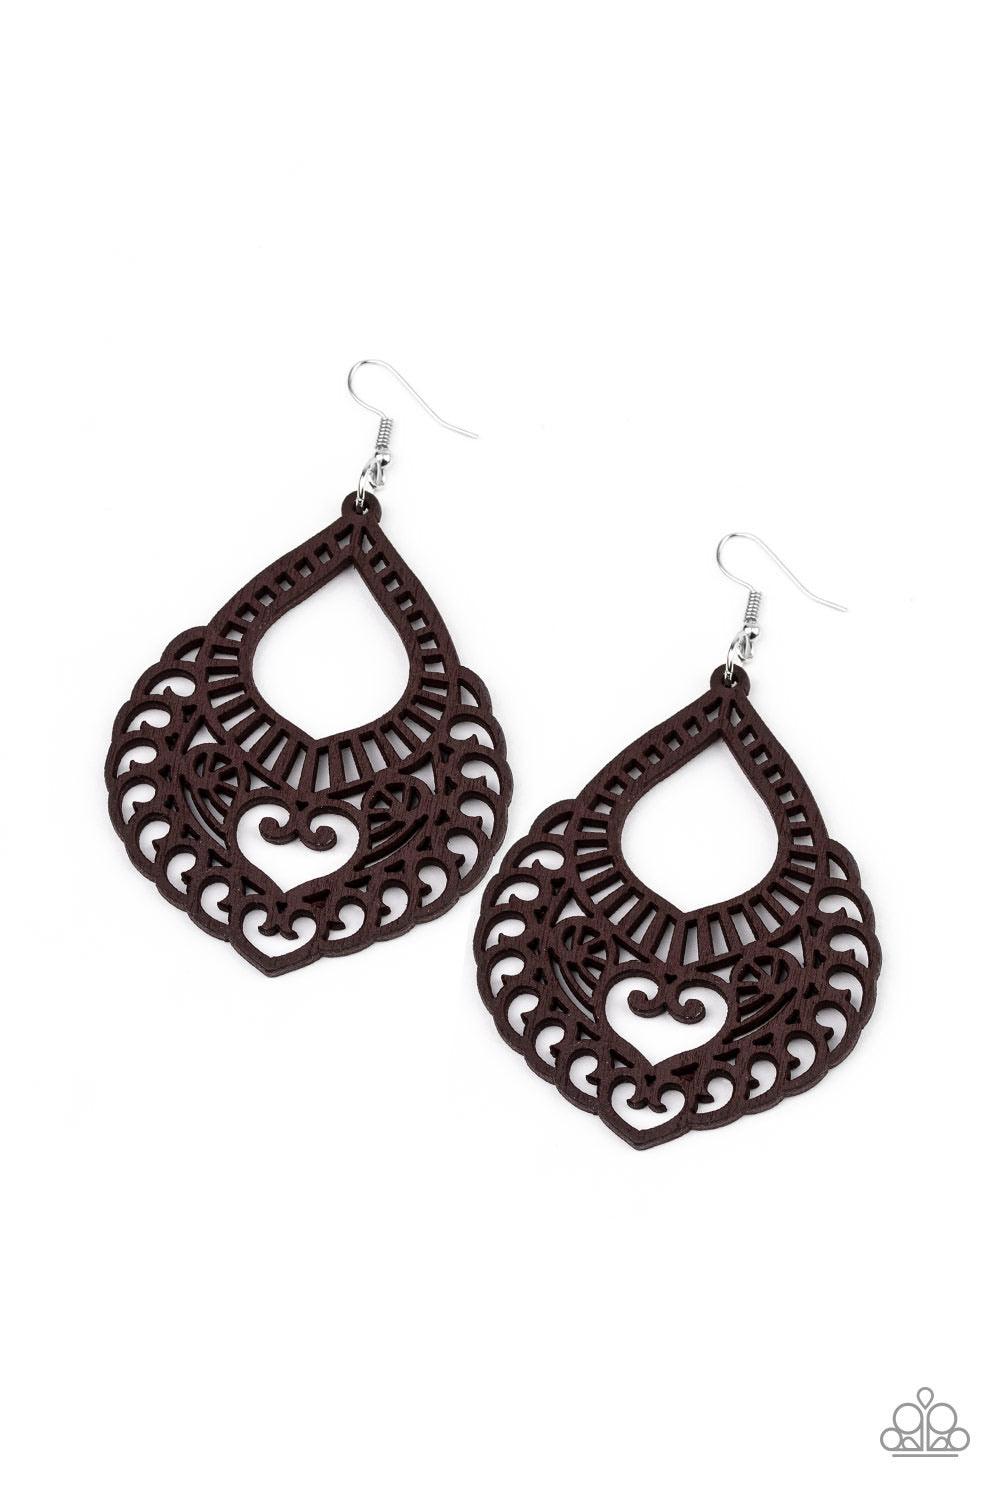 Paparazzi Accessories If You WOOD Be So Kind - Brown Painted in a brown finish, an airy wooden frame swirling with filigree detail swings from the ear for a seasonal look. Earring attaches to a standard fishhook fitting. Sold as one pair of earrings. Jewe